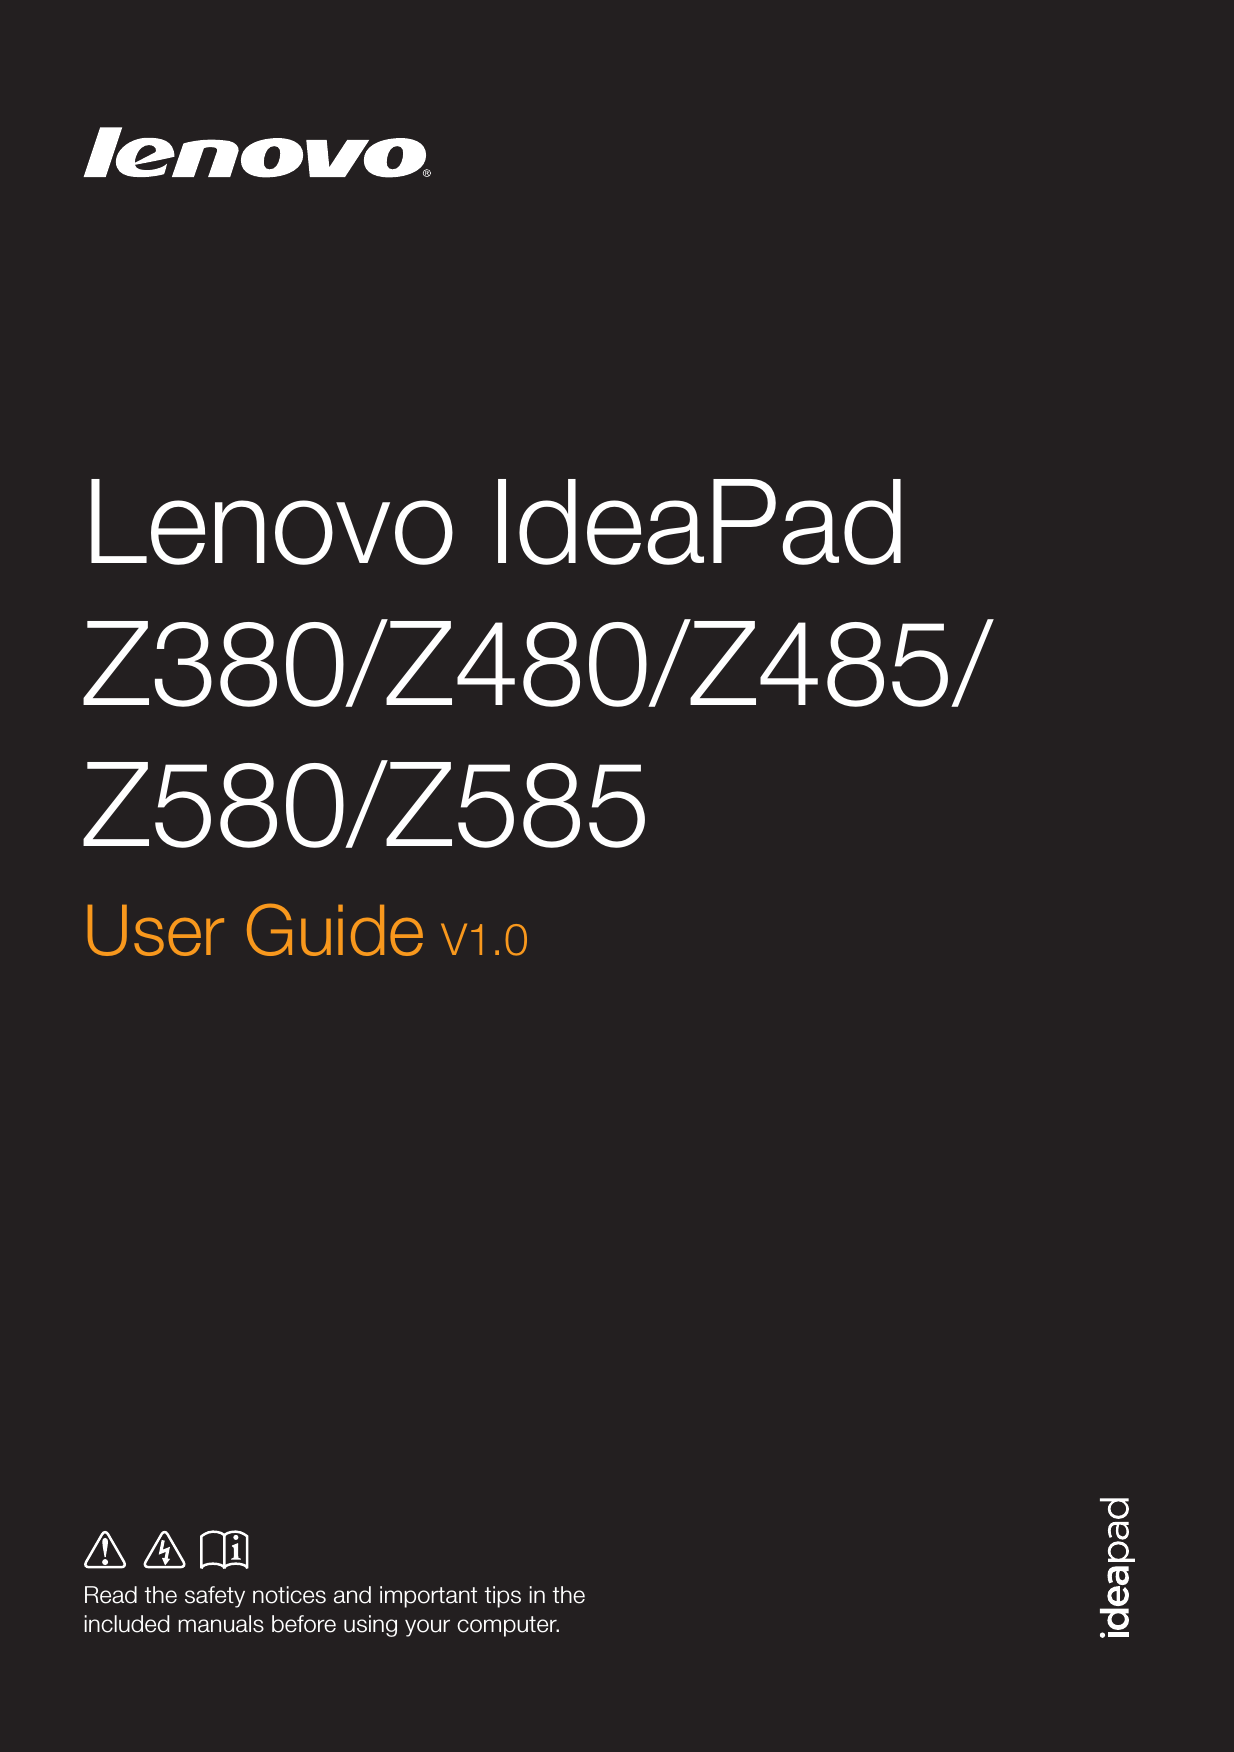 Lenovo IdeaPad Z380/Z480/Z485/Z580/Z585Read the safety notices and important tips in the included manuals before using your computer.User Guide V1.0